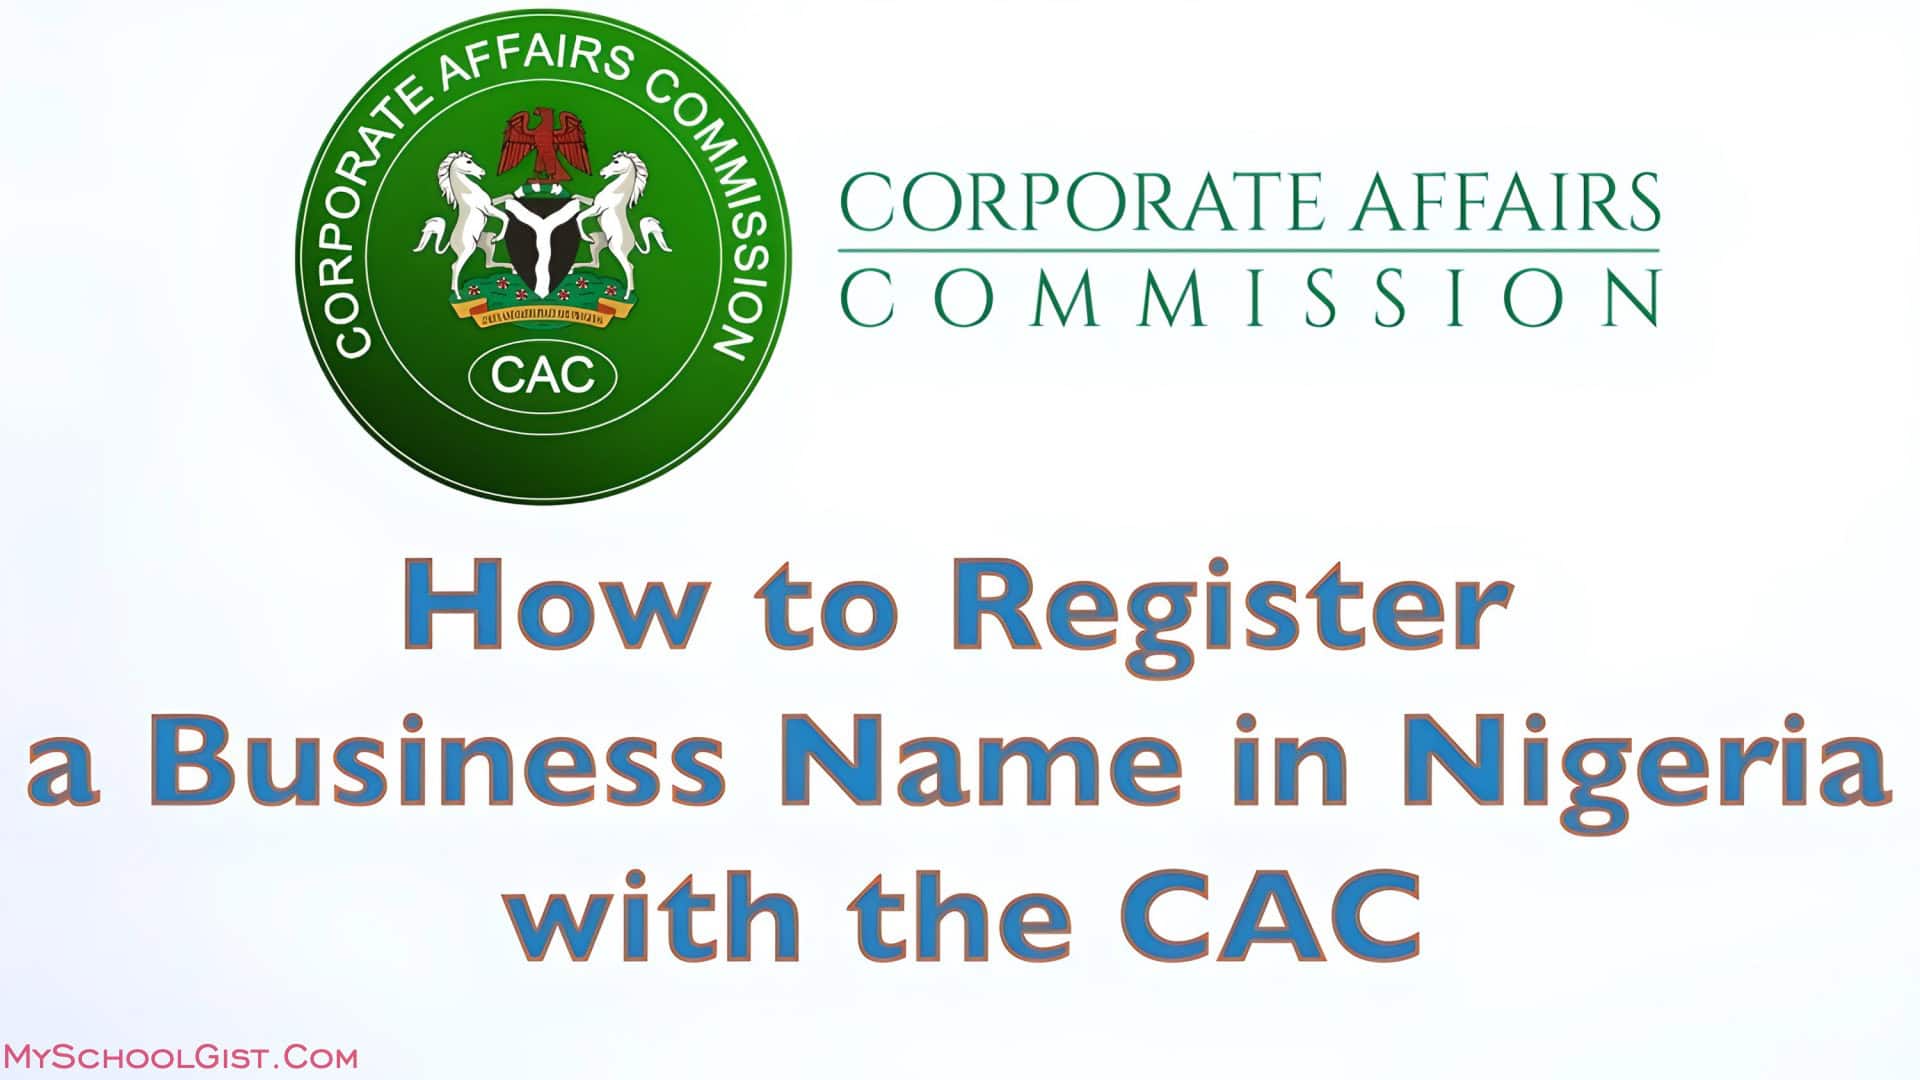 How to Register a Business Name in Nigeria with CAC